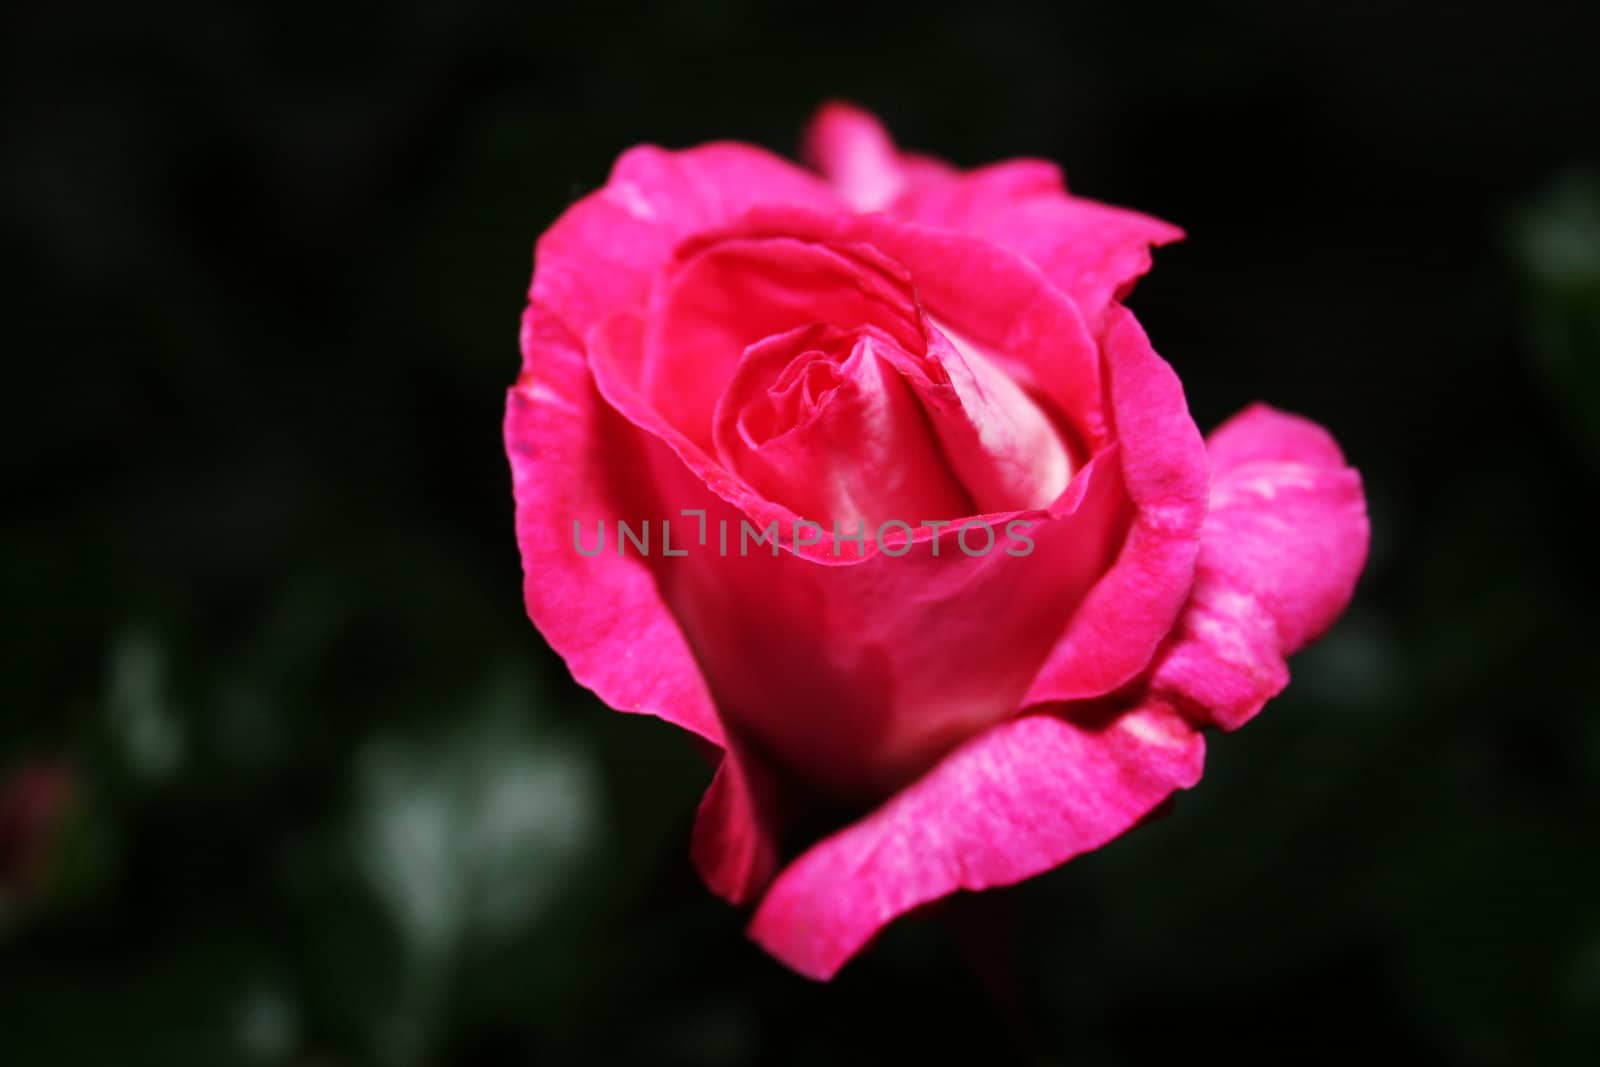 Pink rose by timscottrom